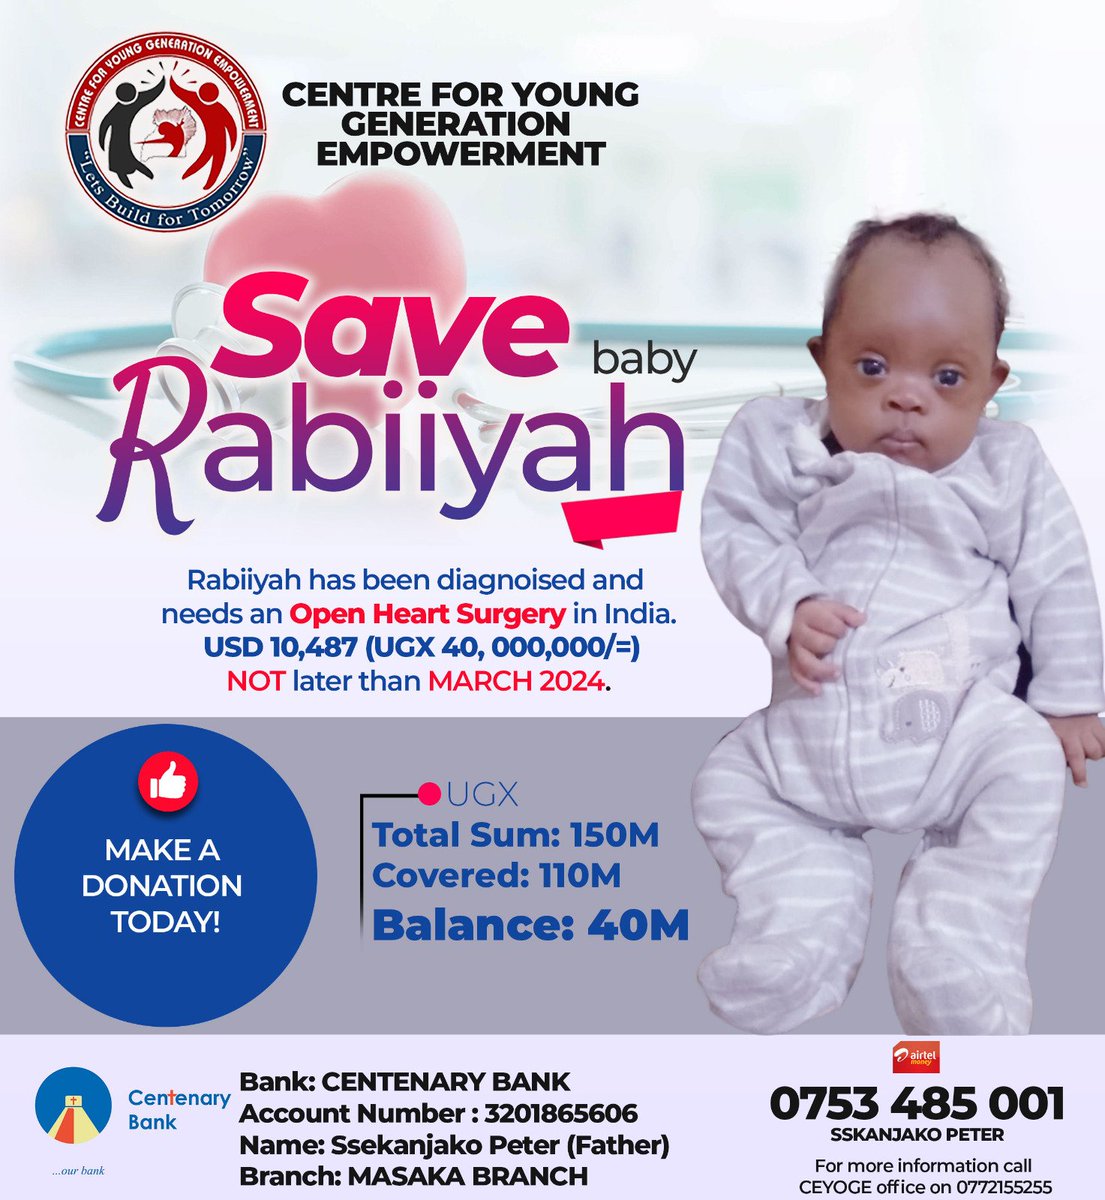 She is to undergo a heart surgery by April this year (2024). Life has no spare let us all support this cause. Thank you. You can share with your other networks. Thank you 🙏 #SaveRabiiyah